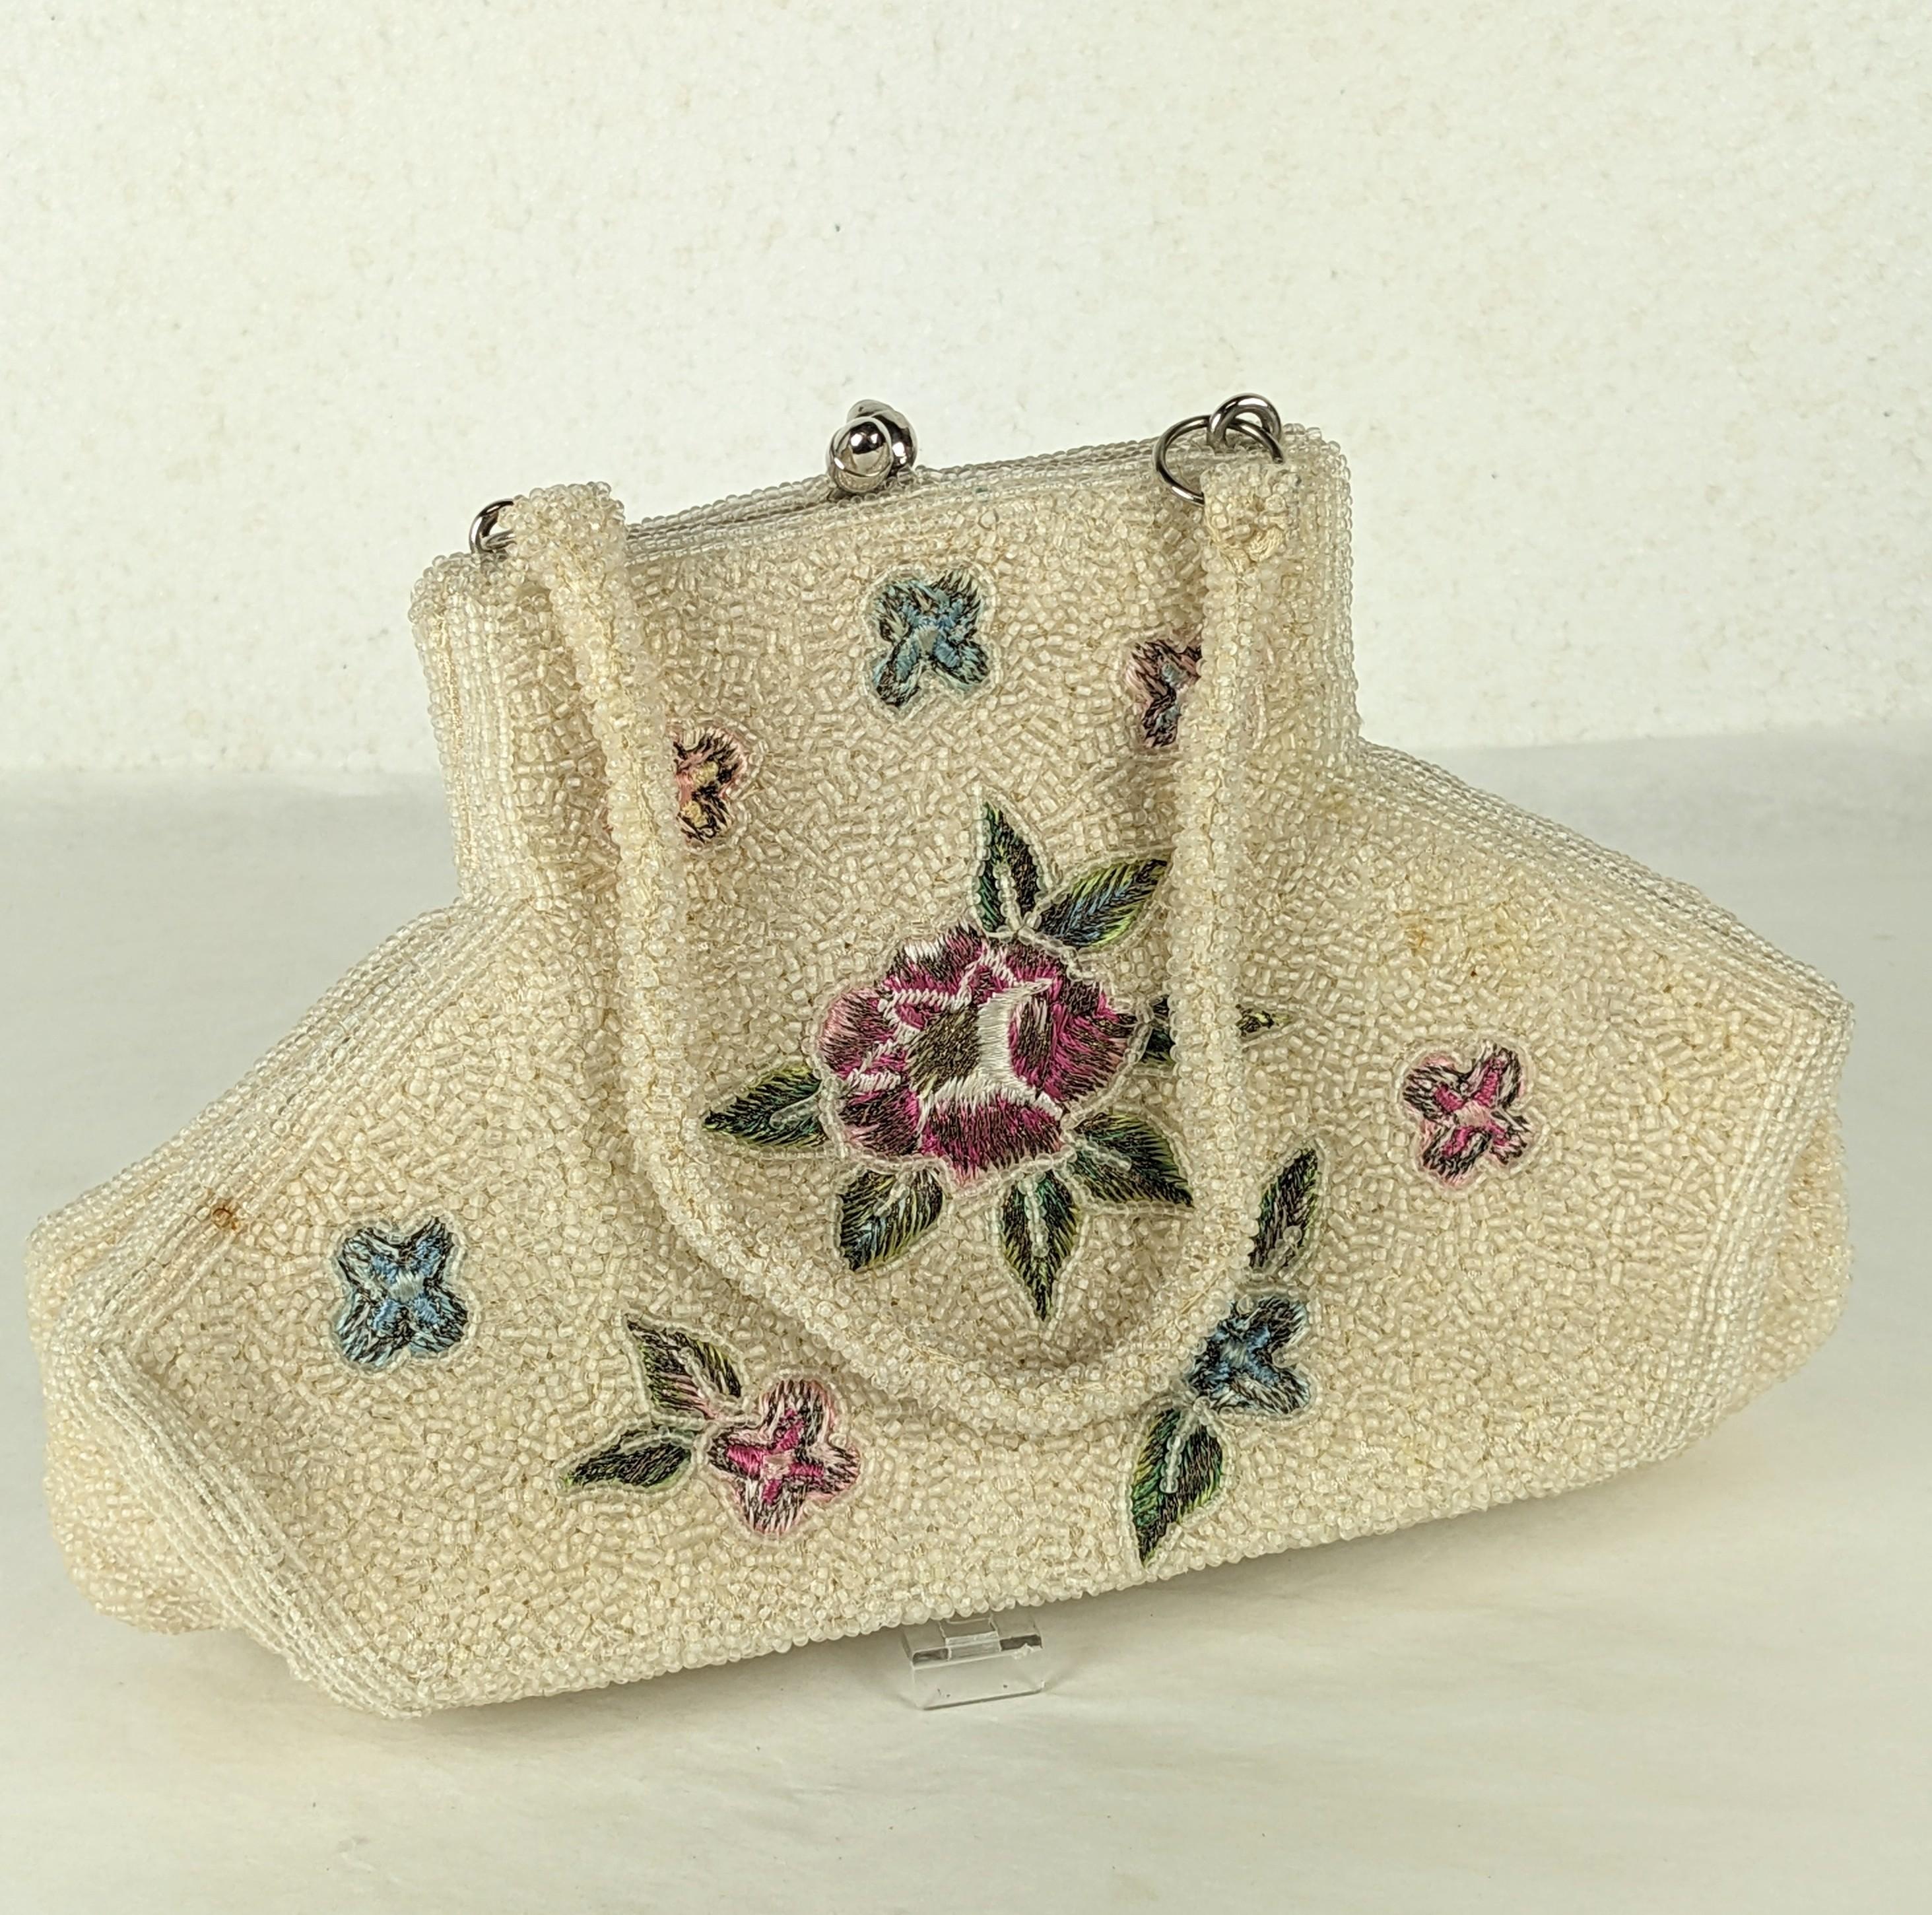 Unusual Beaded and Embroidered Bag, Charlet Bags In Good Condition For Sale In New York, NY